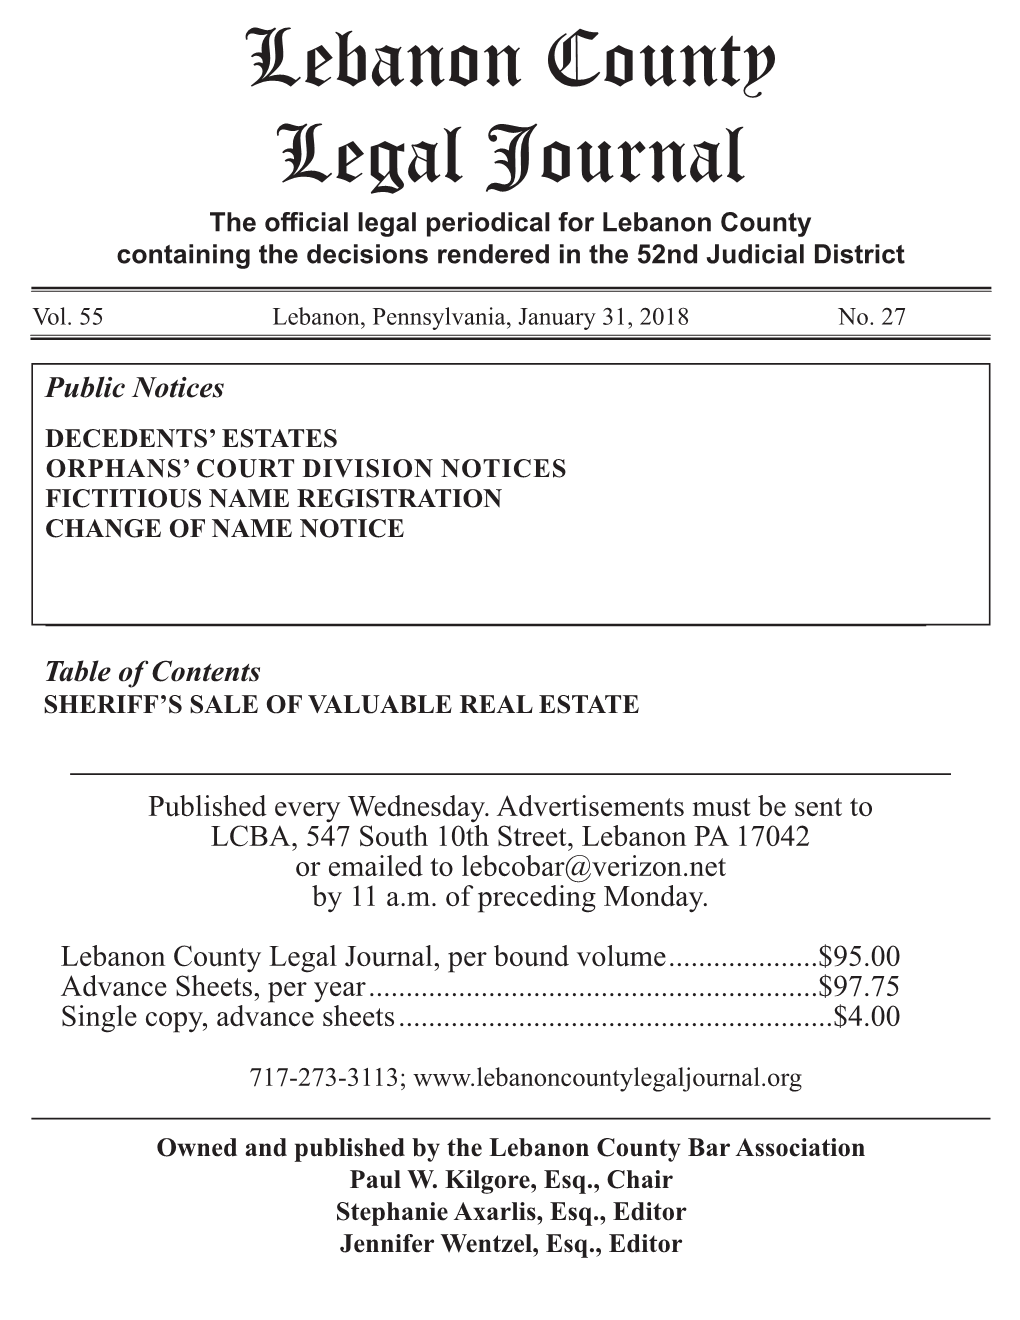 Lebanon County Legal Journal the Official Legal Periodical for Lebanon County Containing the Decisions Rendered in the 52Nd Judicial District